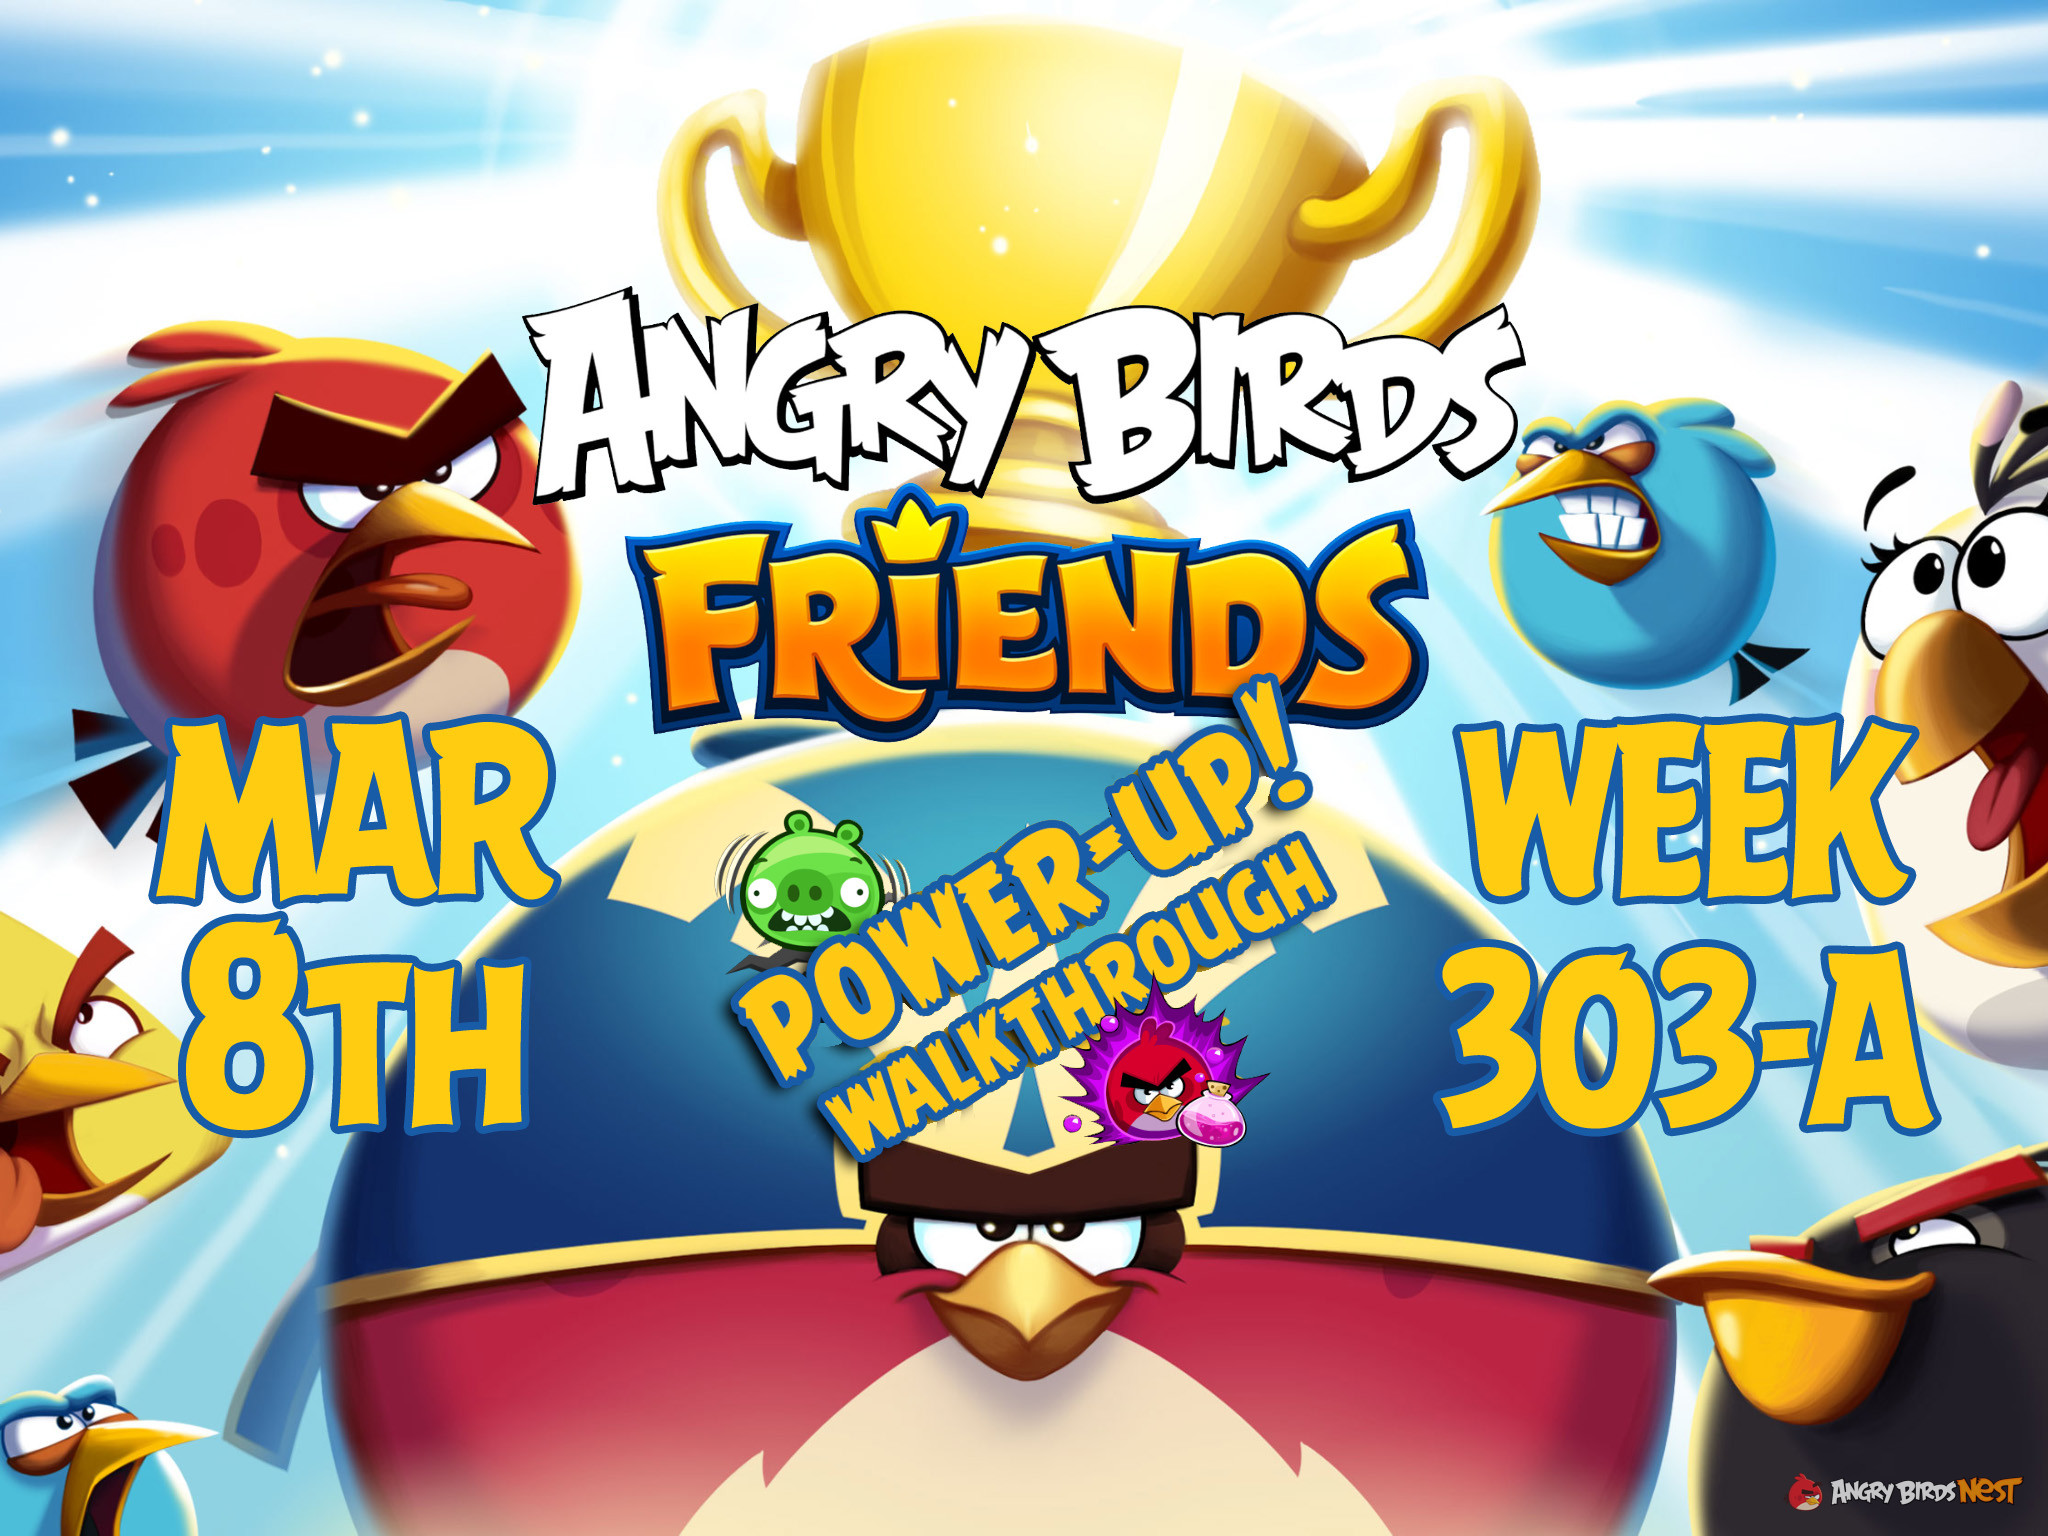 Angry Birds Friends Tournament Week 303-A Feature Image PU